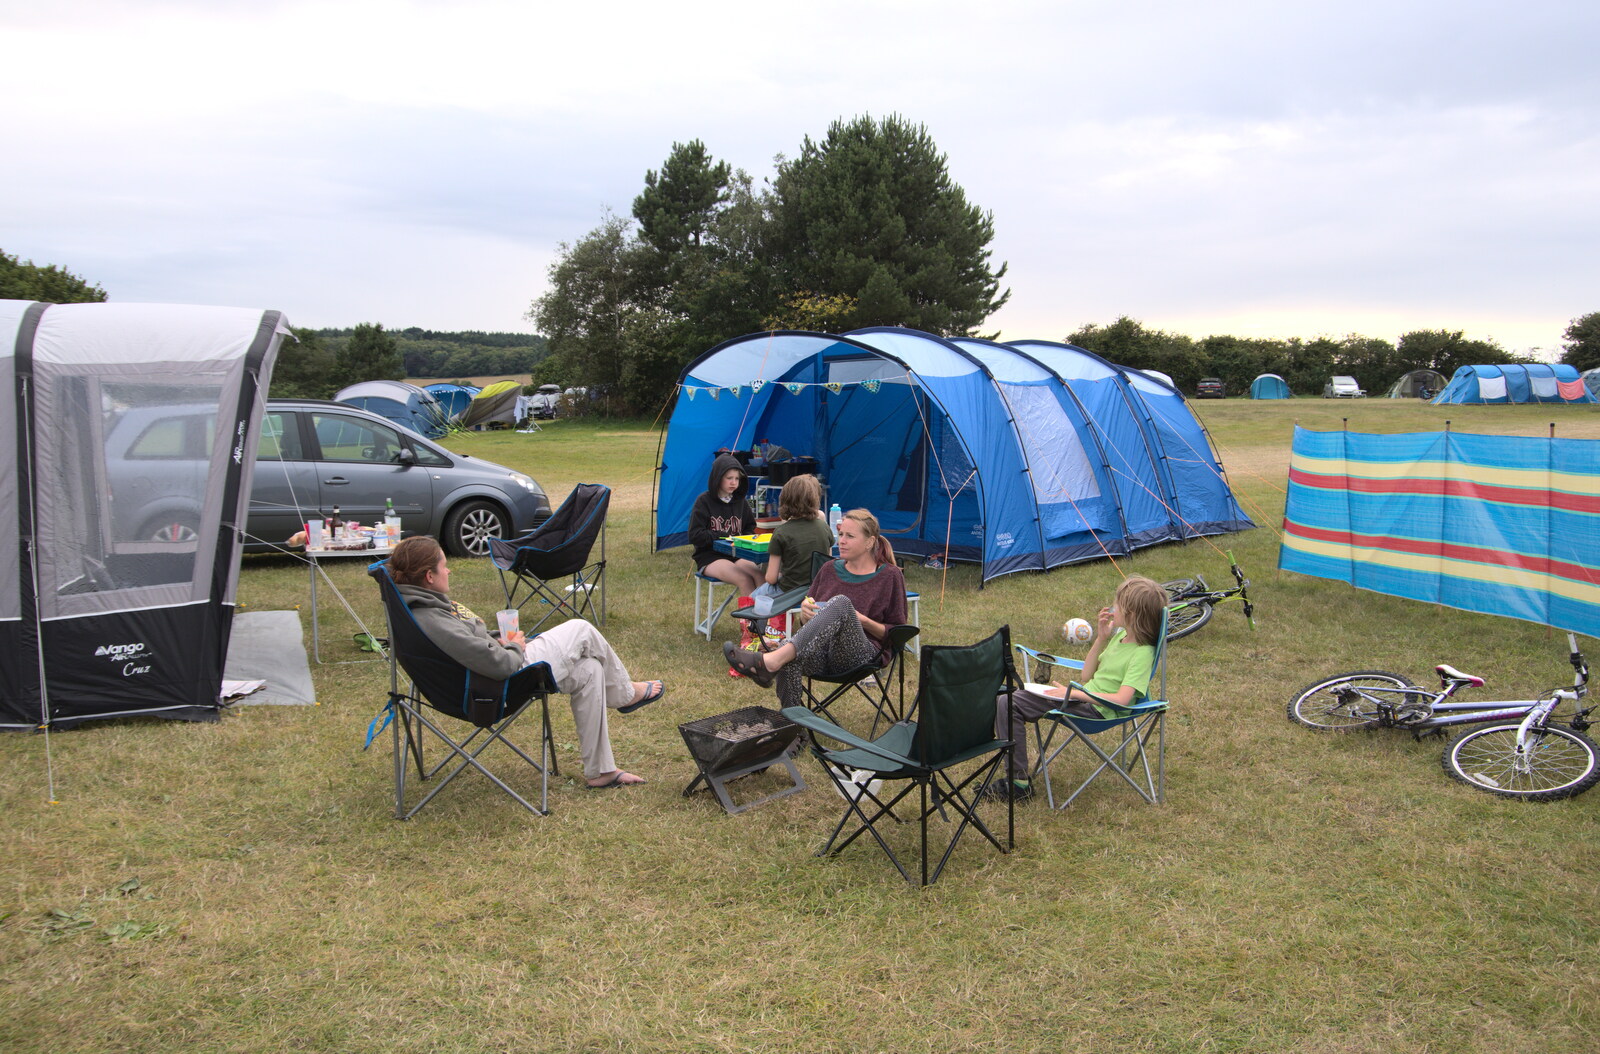 Our corner of the campsite from Camping on the Coast, East Runton, North Norfolk - 25th July 2020